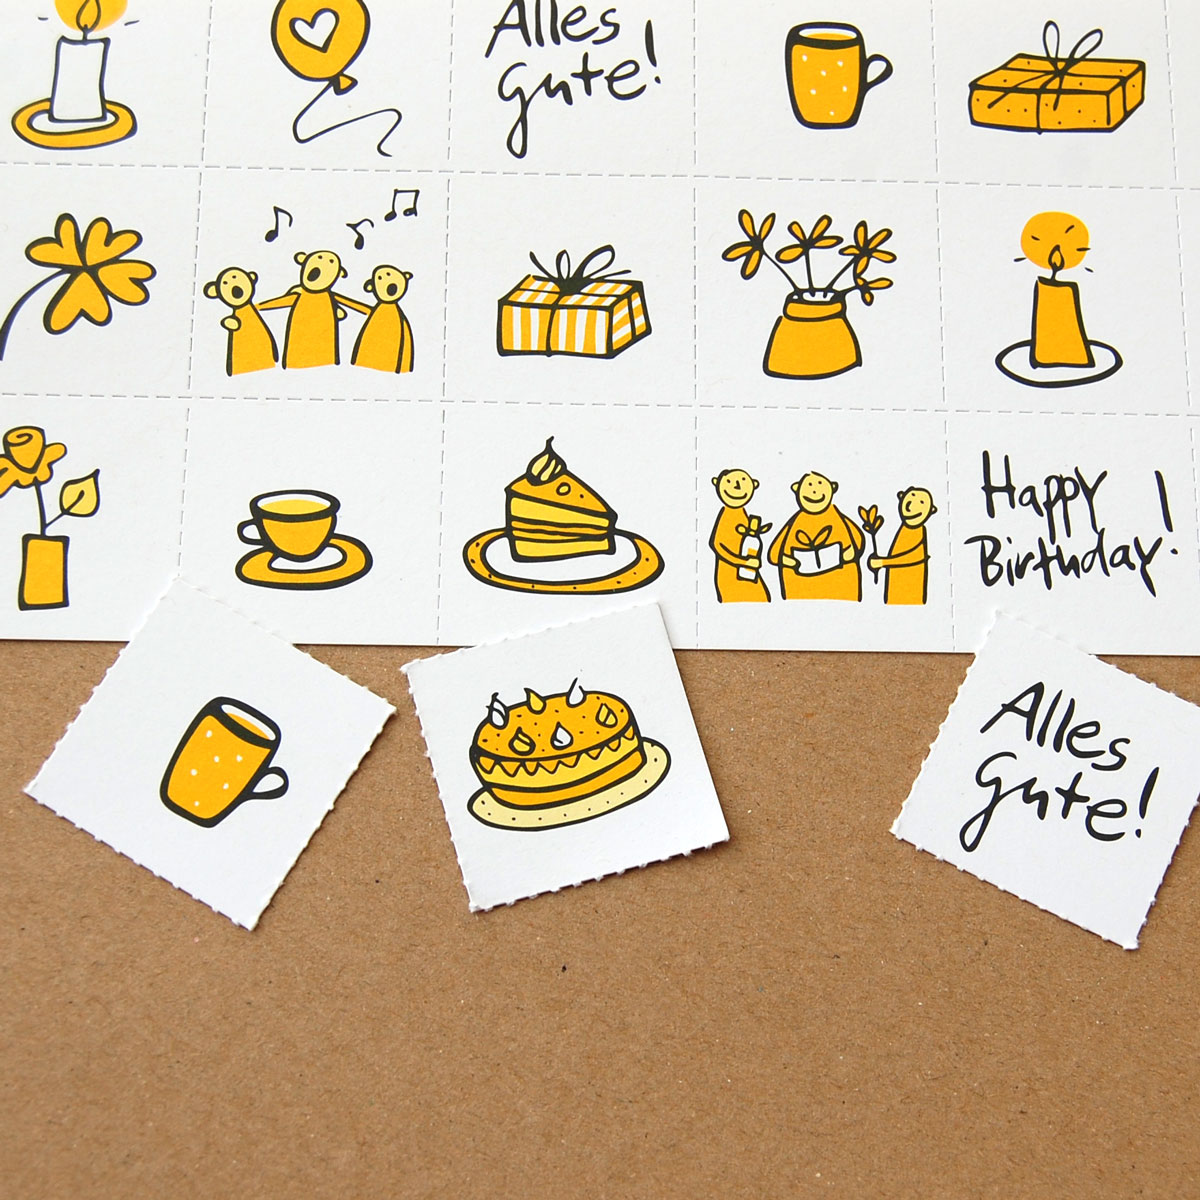 Alles Gute! Happy Birthday! - bilingual Birthday cards with english and german wishes